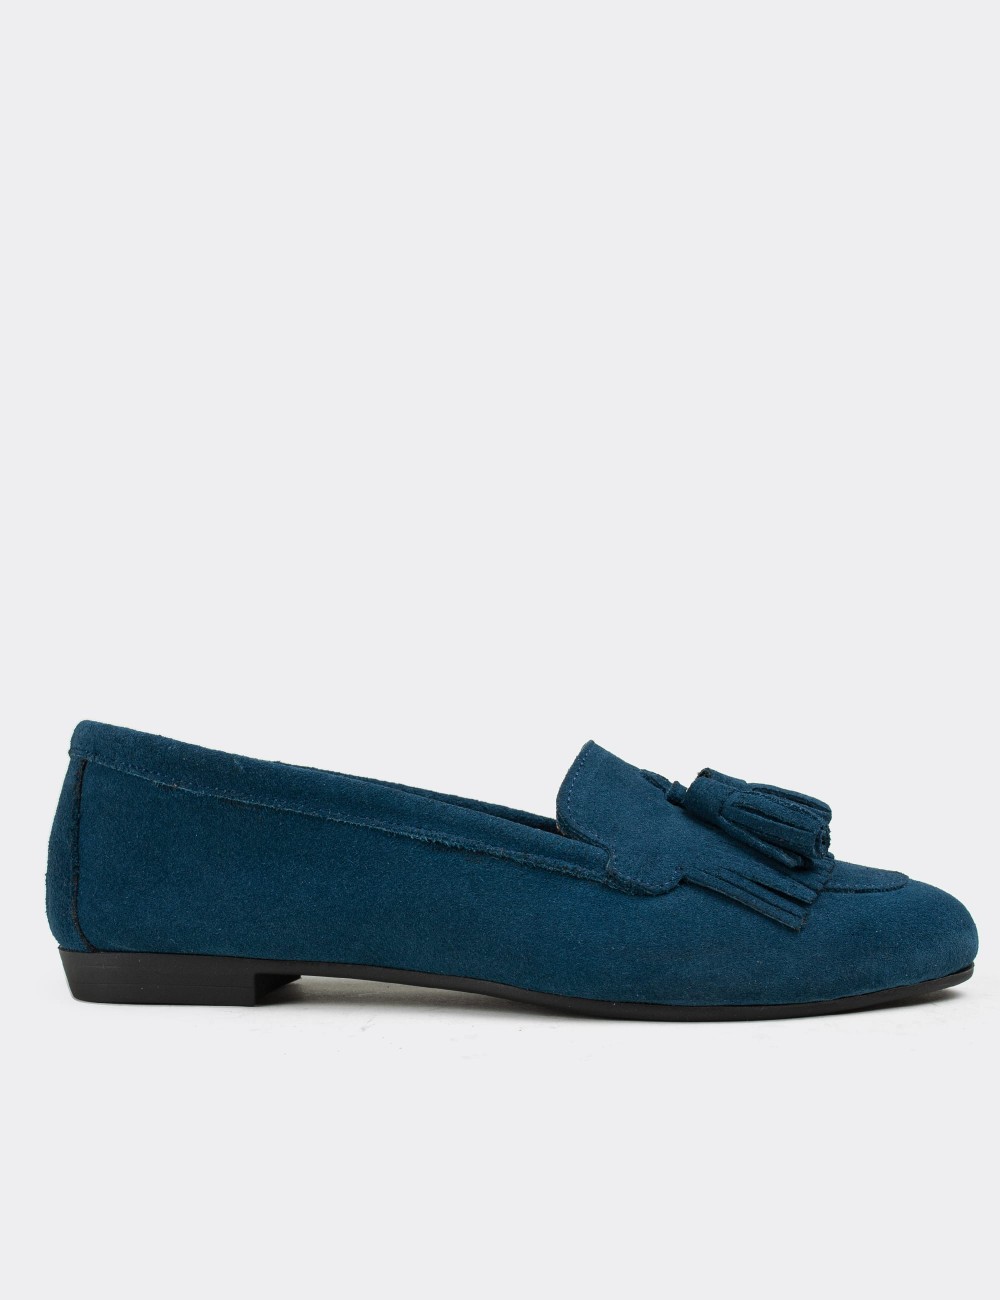 Blue Suede Leather Loafers - E3203ZMVIC01